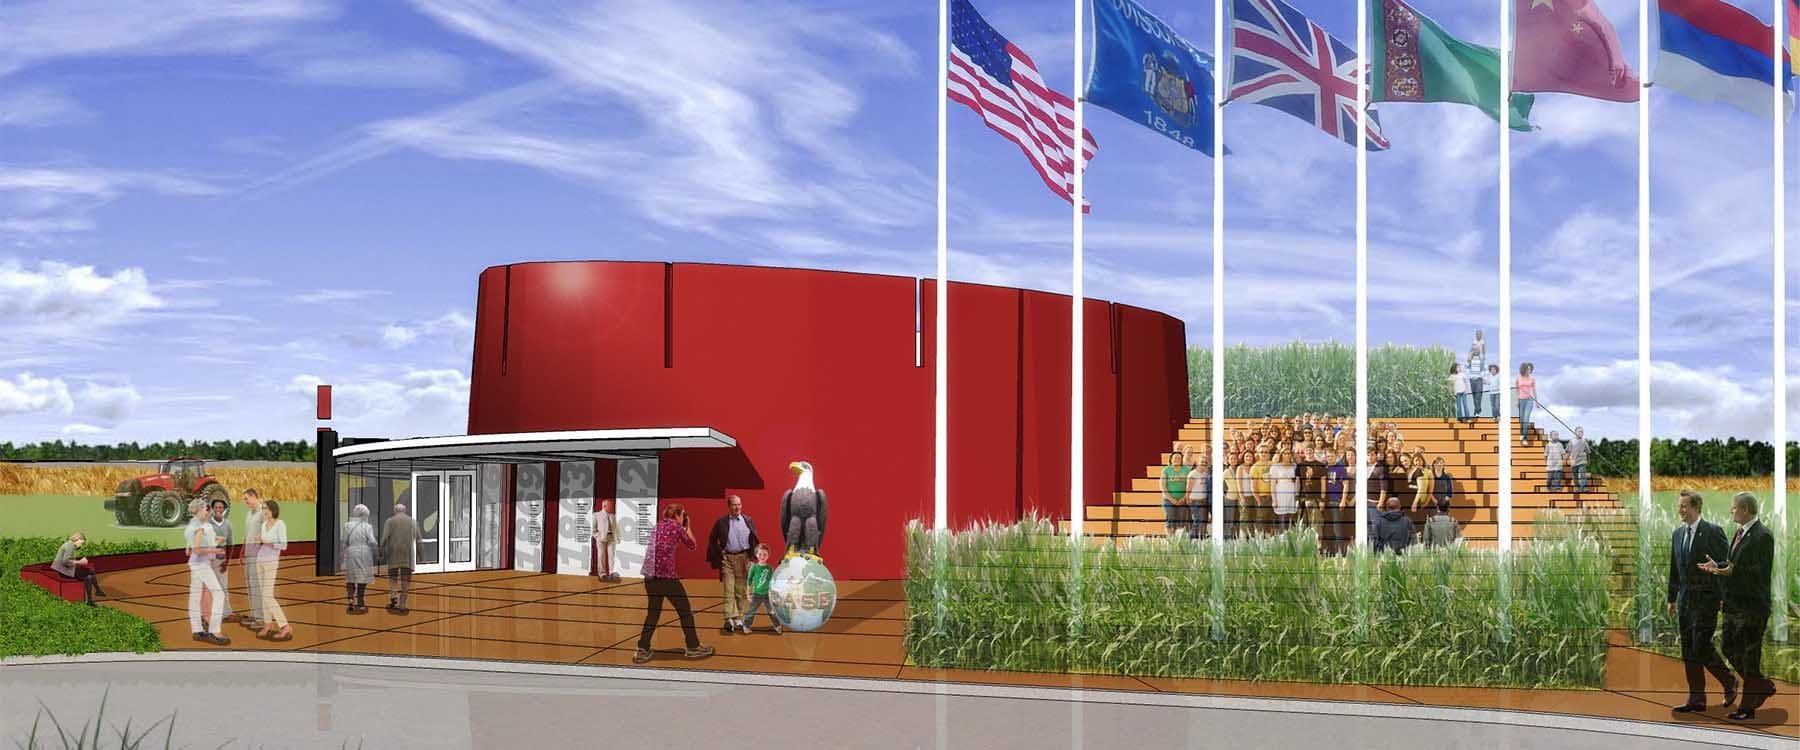 Rendering of the proposed Case IH visitor center. This corporate design prioritized corporate color and agricultural form, and putting visitors in touch with the earth, to evidence corporate branding.